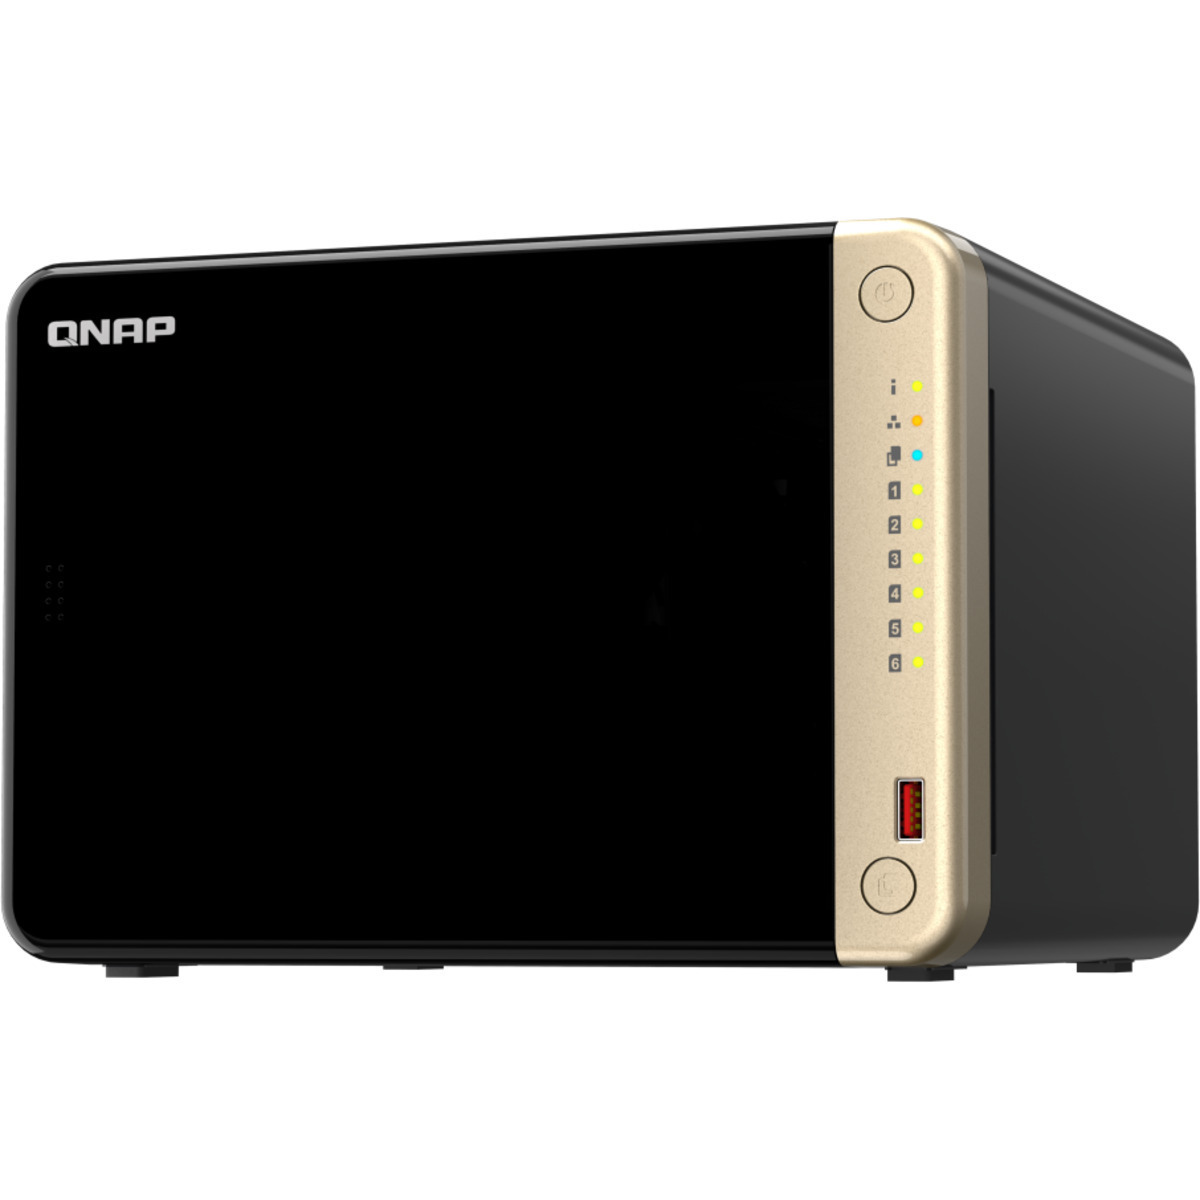 QNAP TS-664 8tb 6-Bay Desktop Multimedia / Power User / Business NAS - Network Attached Storage Device 4x2tb Western Digital Red SA500 WDS200T1R0A 2.5 560/530MB/s SATA 6Gb/s SSD NAS Class Drives Installed - Burn-In Tested TS-664